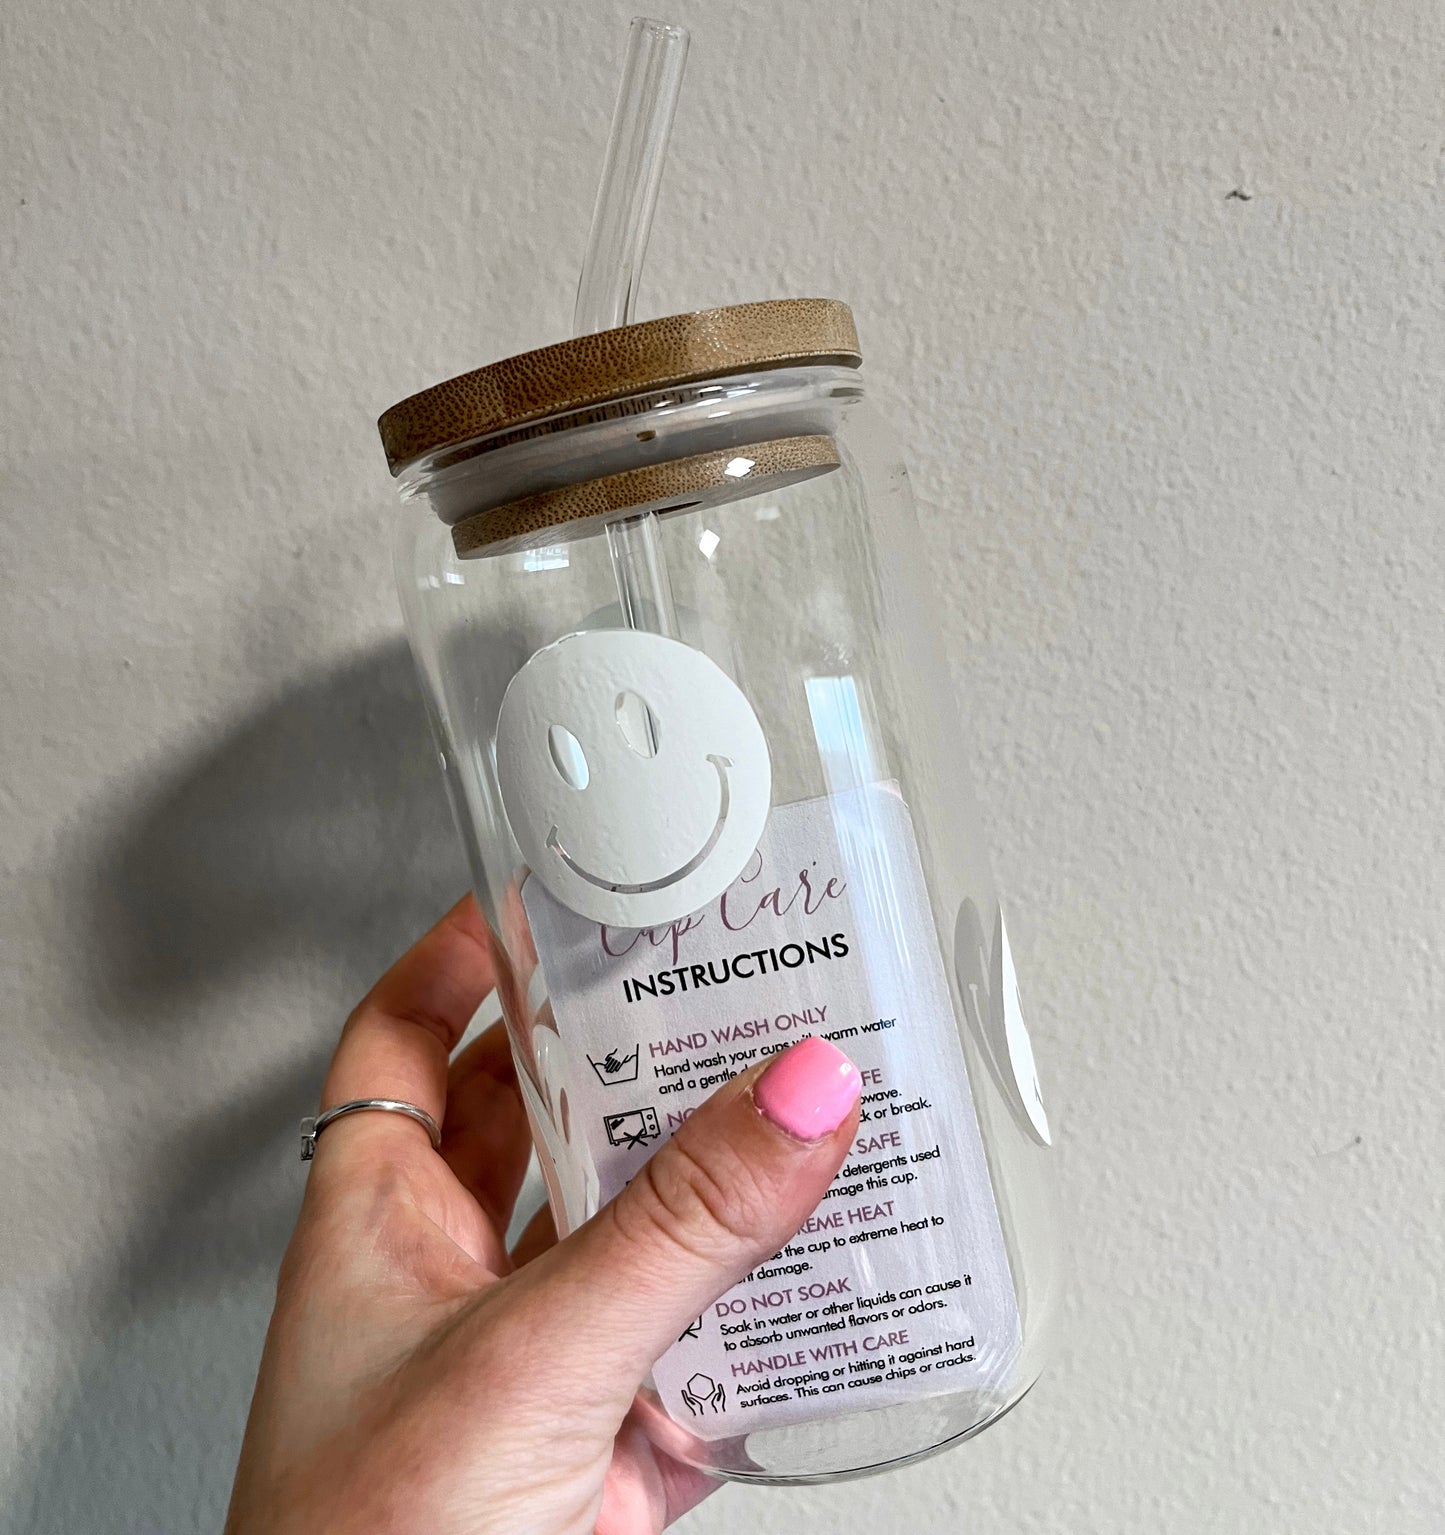 16oz Smiley Face Glass Cup